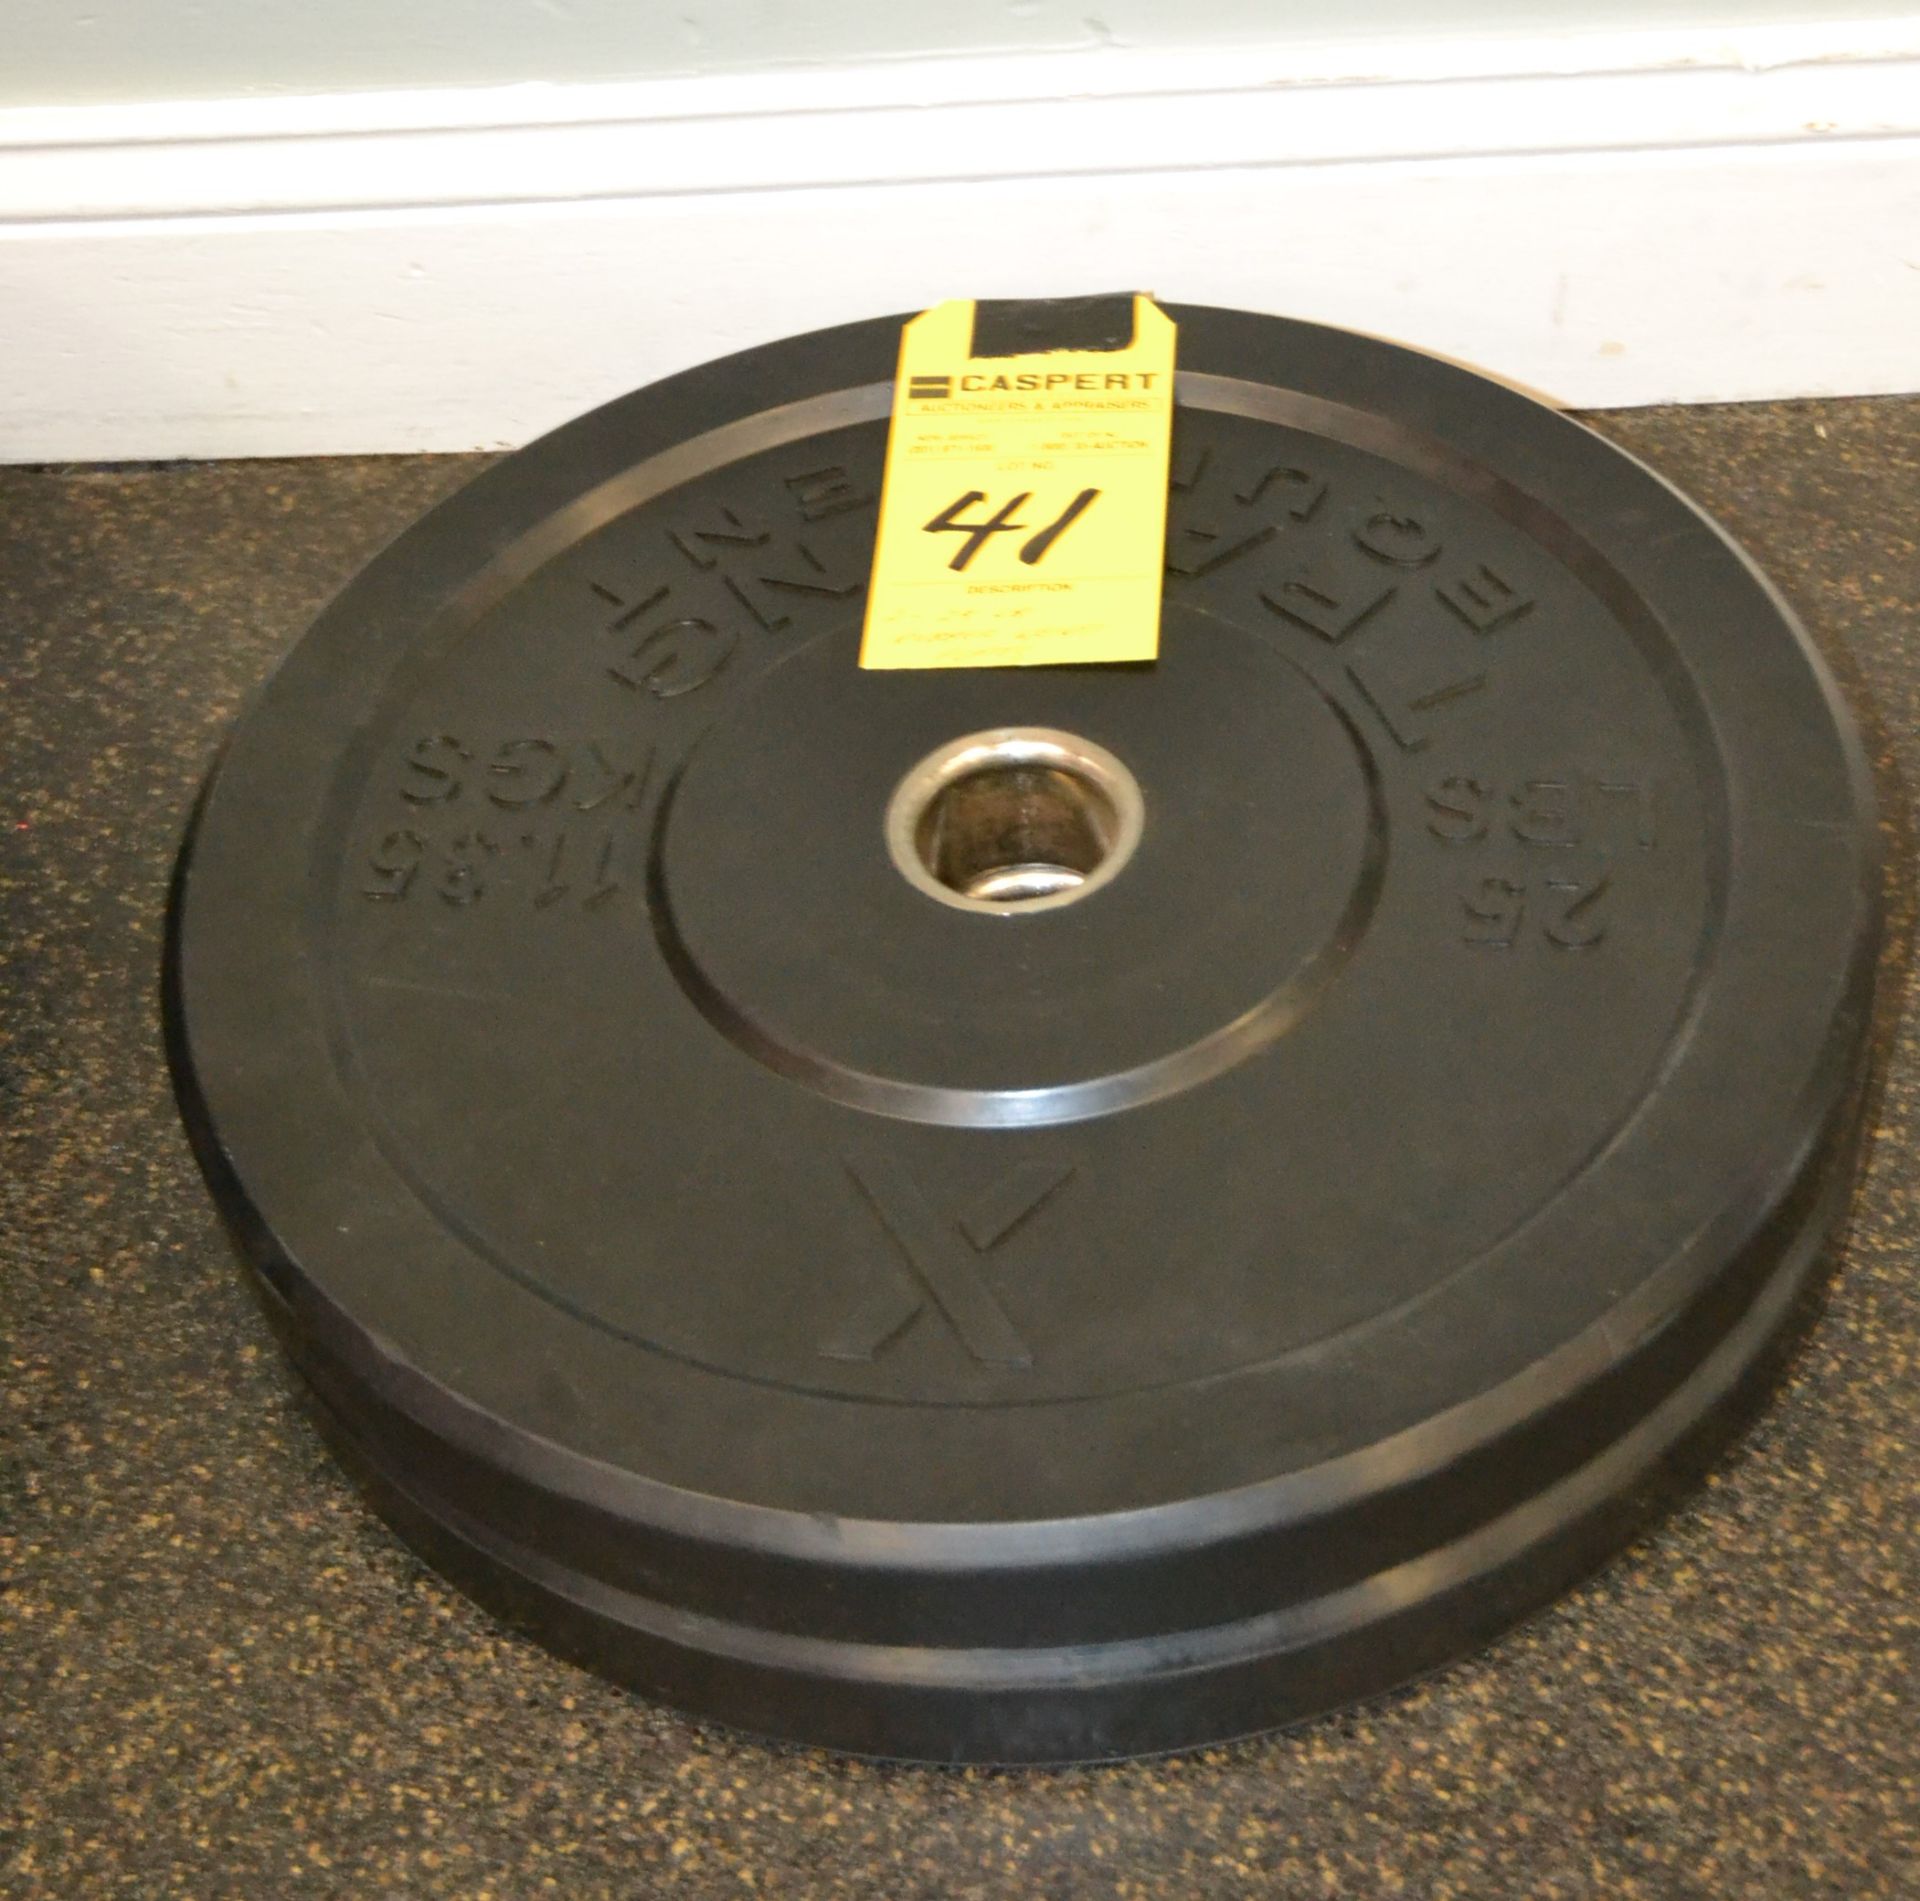 25 LB. RUBBER WEIGHT PLATES